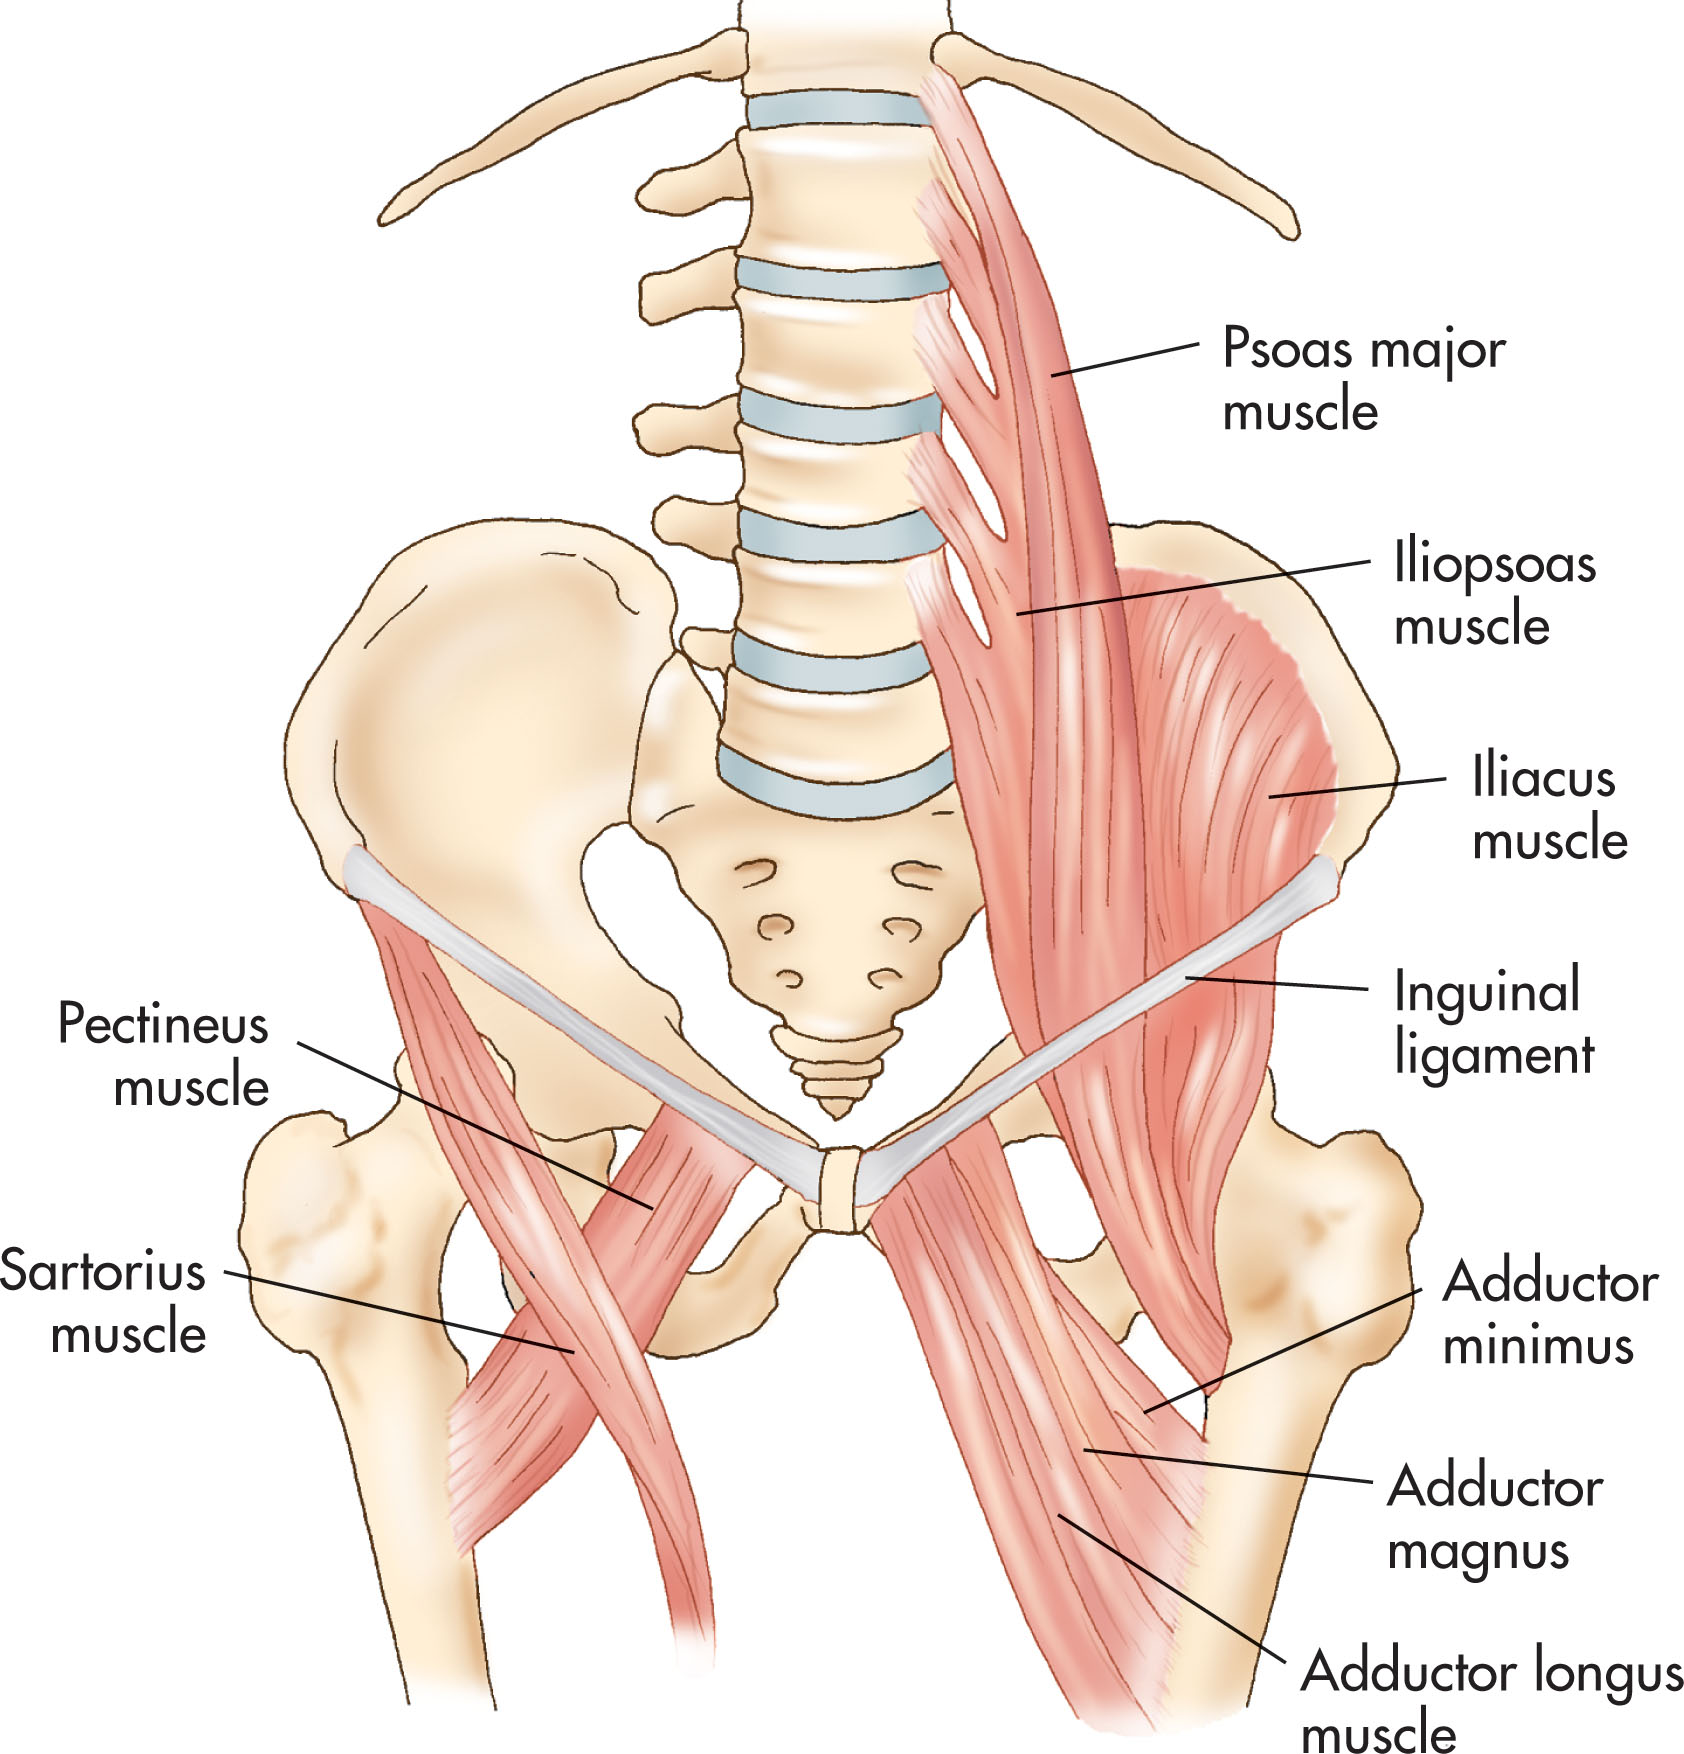 Fig. 41.4, Anterior diagram of the psoas major muscle extending from the abdominal cavity into the false pelvis. The iliacus muscle joins the psoas muscle to form the iliopsoas muscle along the sidewall of the false pelvis.